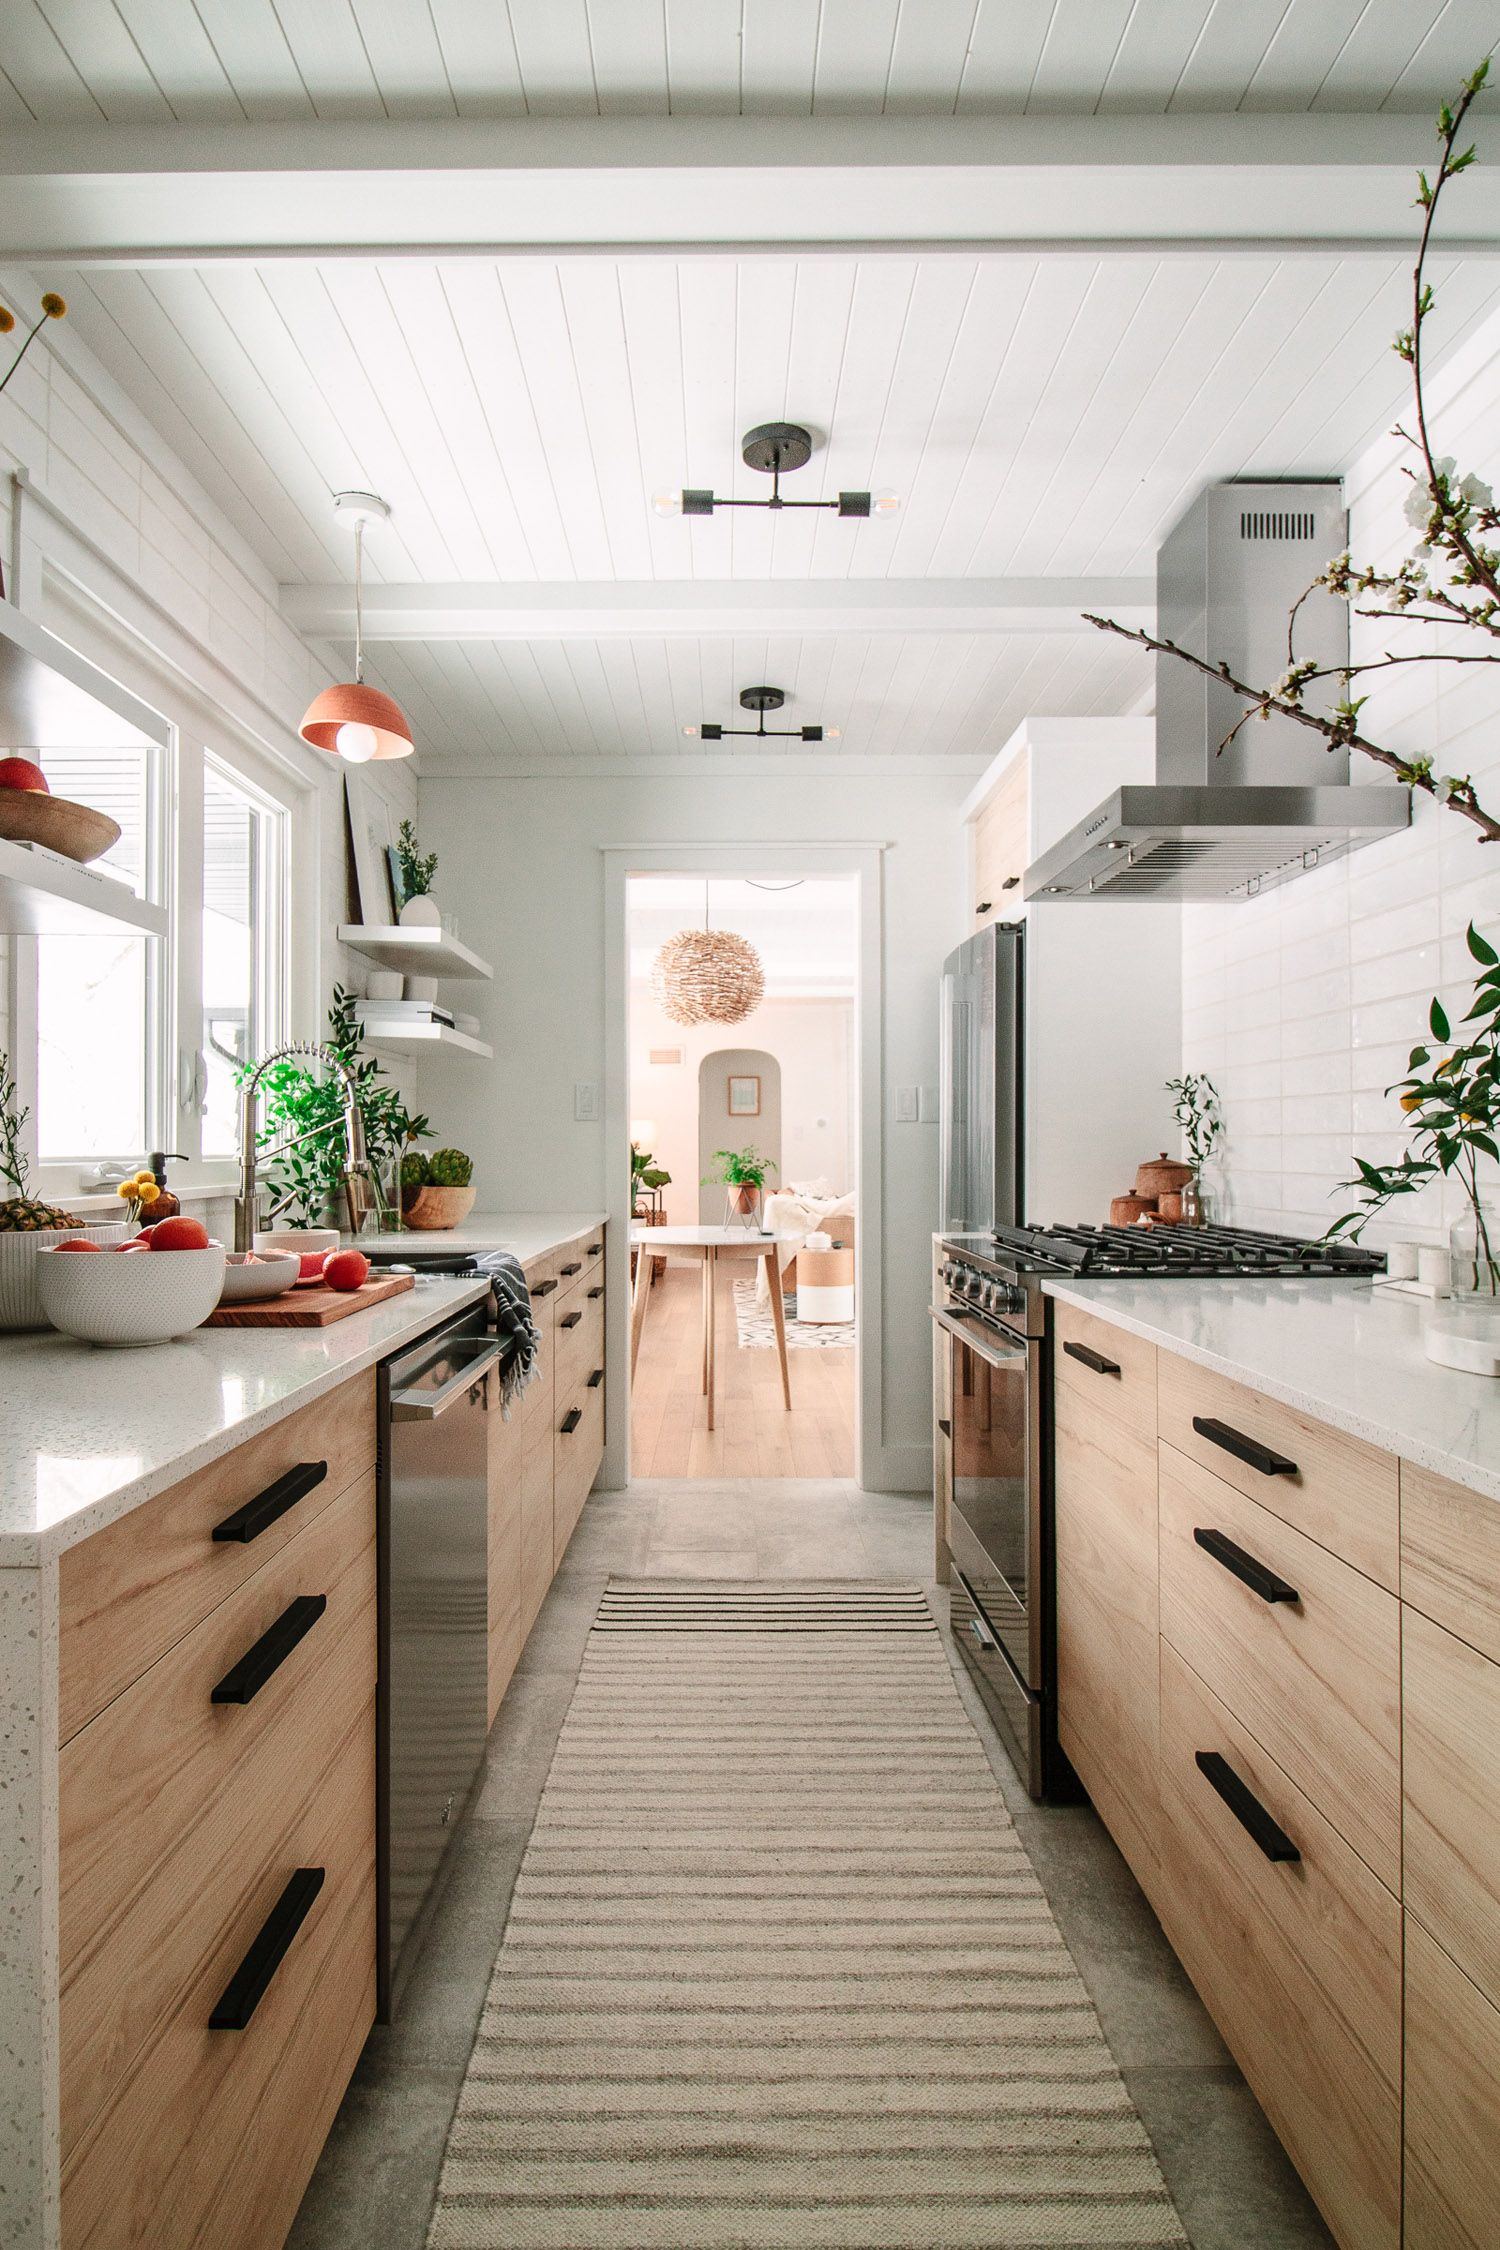 How to Remodel a Galley Kitchen